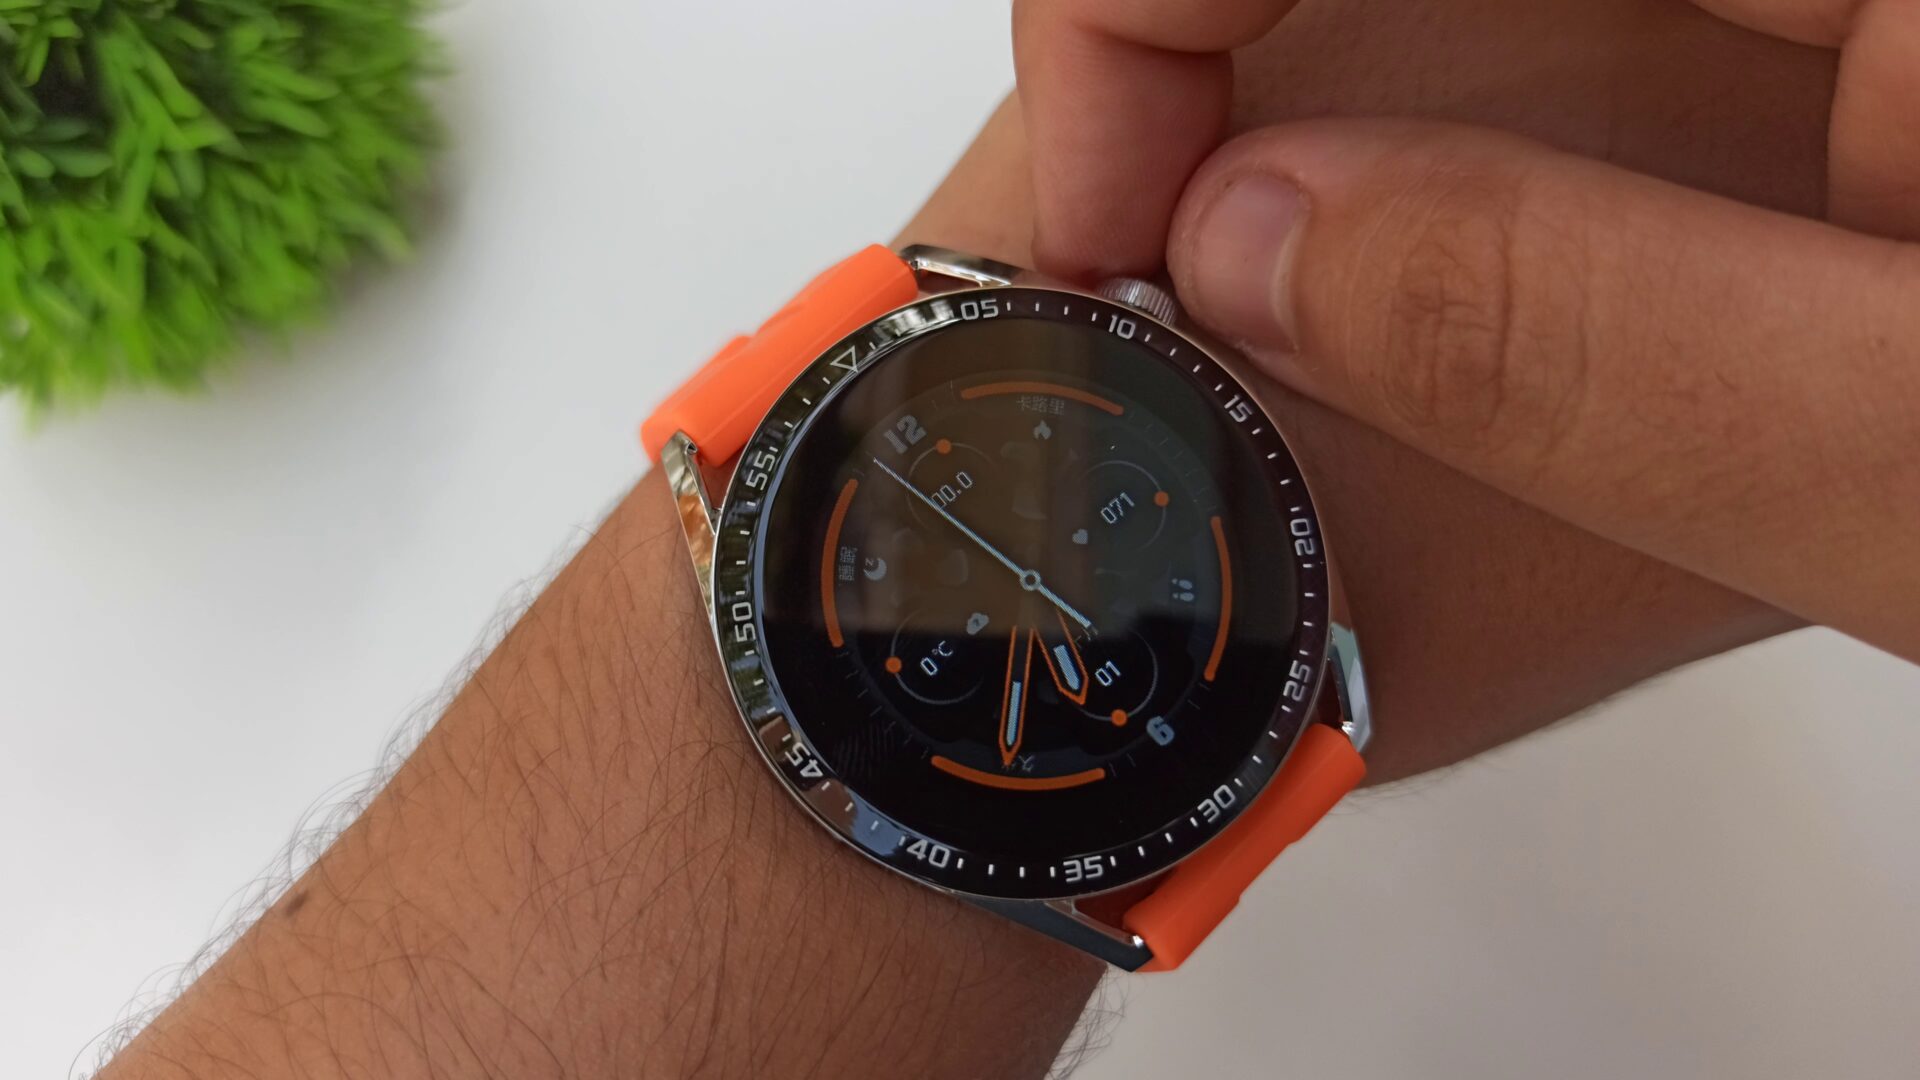 HW3 Pro Smartwatch Review